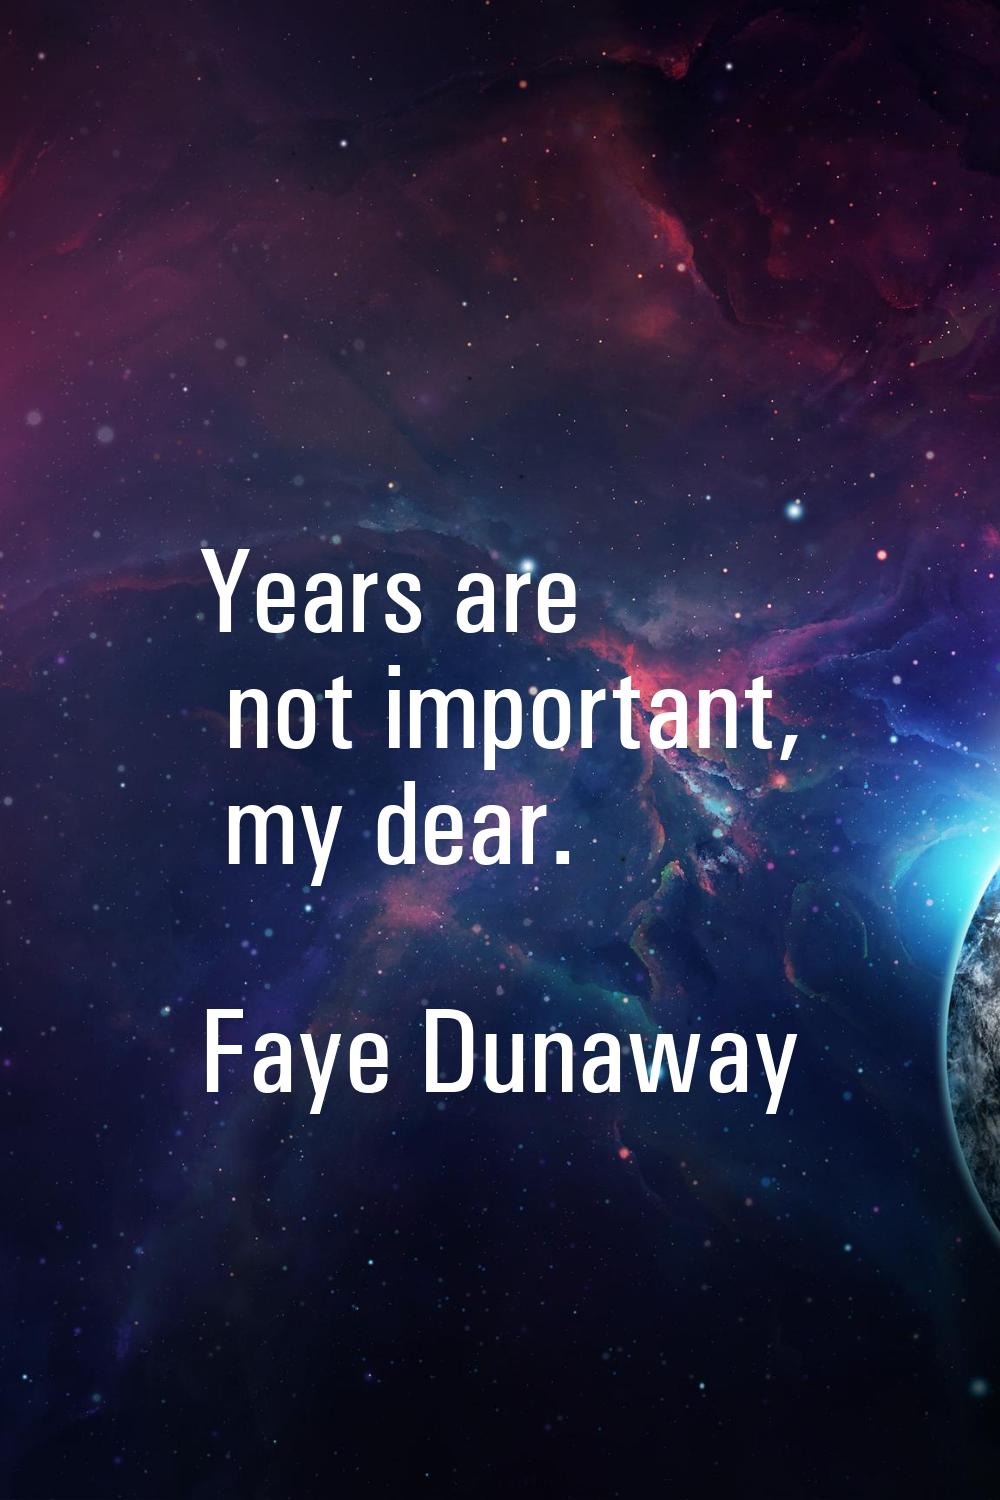 Years are not important, my dear.